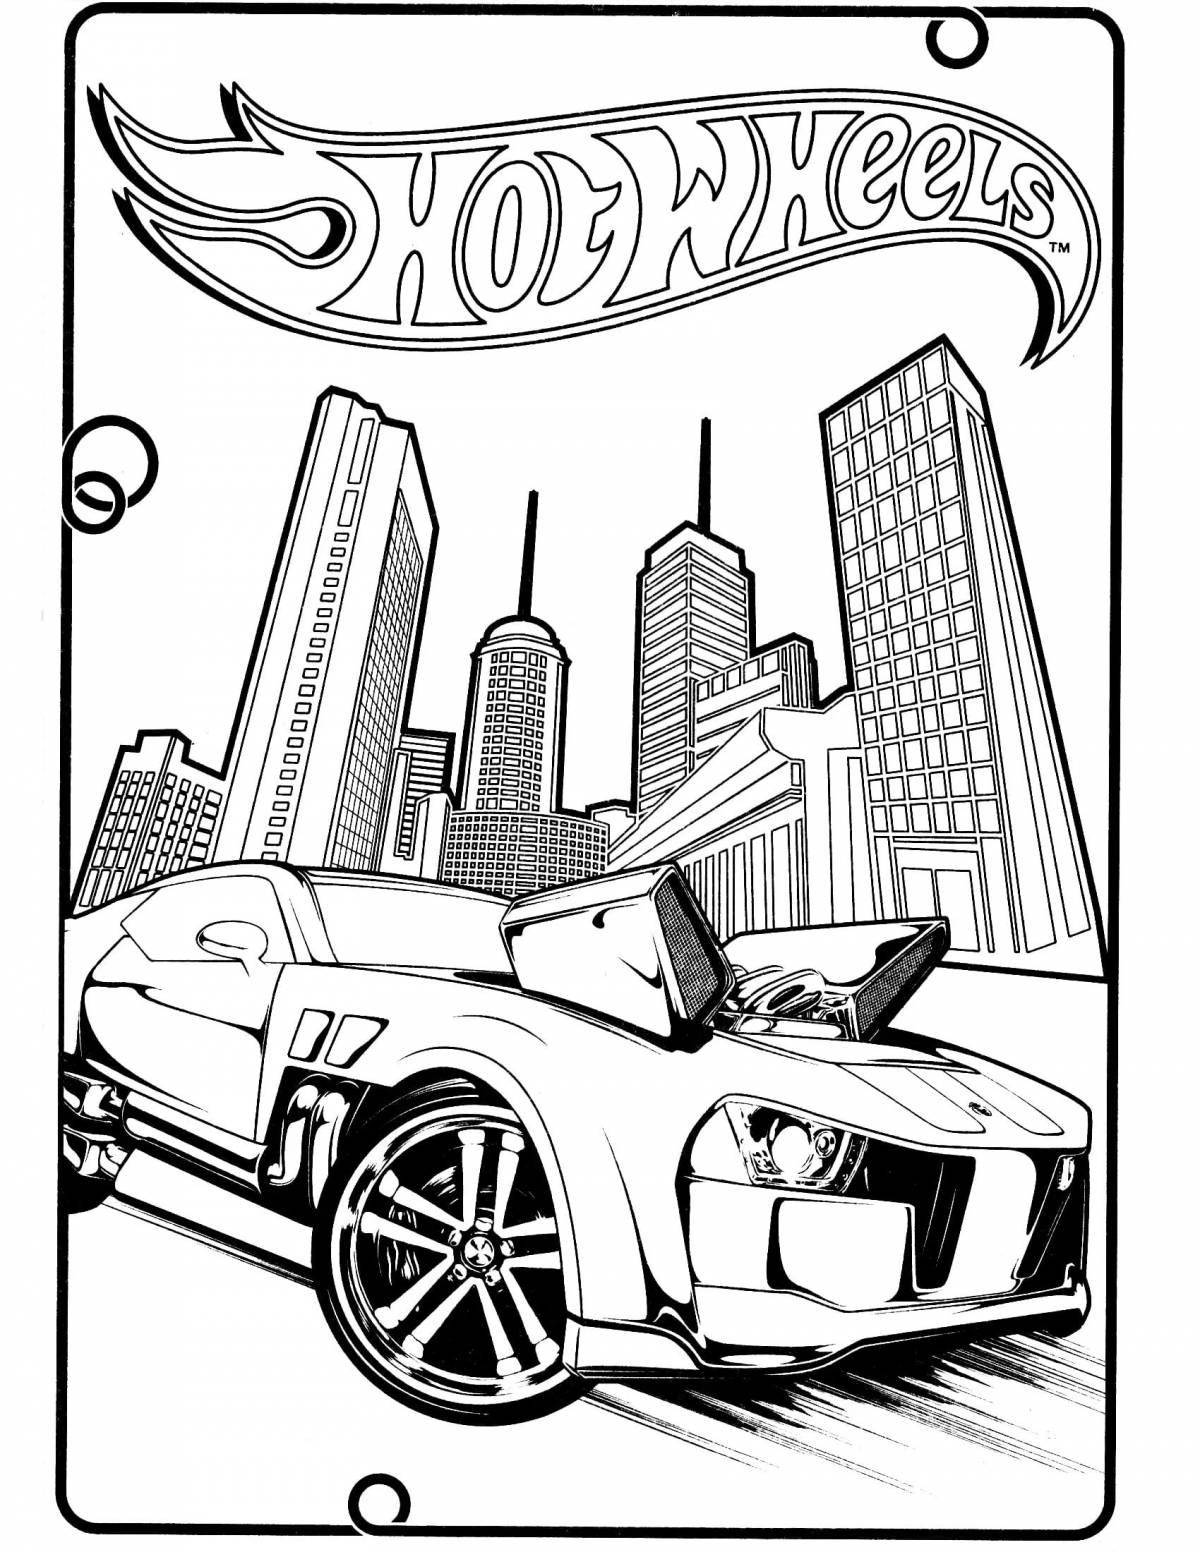 Colourful hot wheels coloring pages for kids